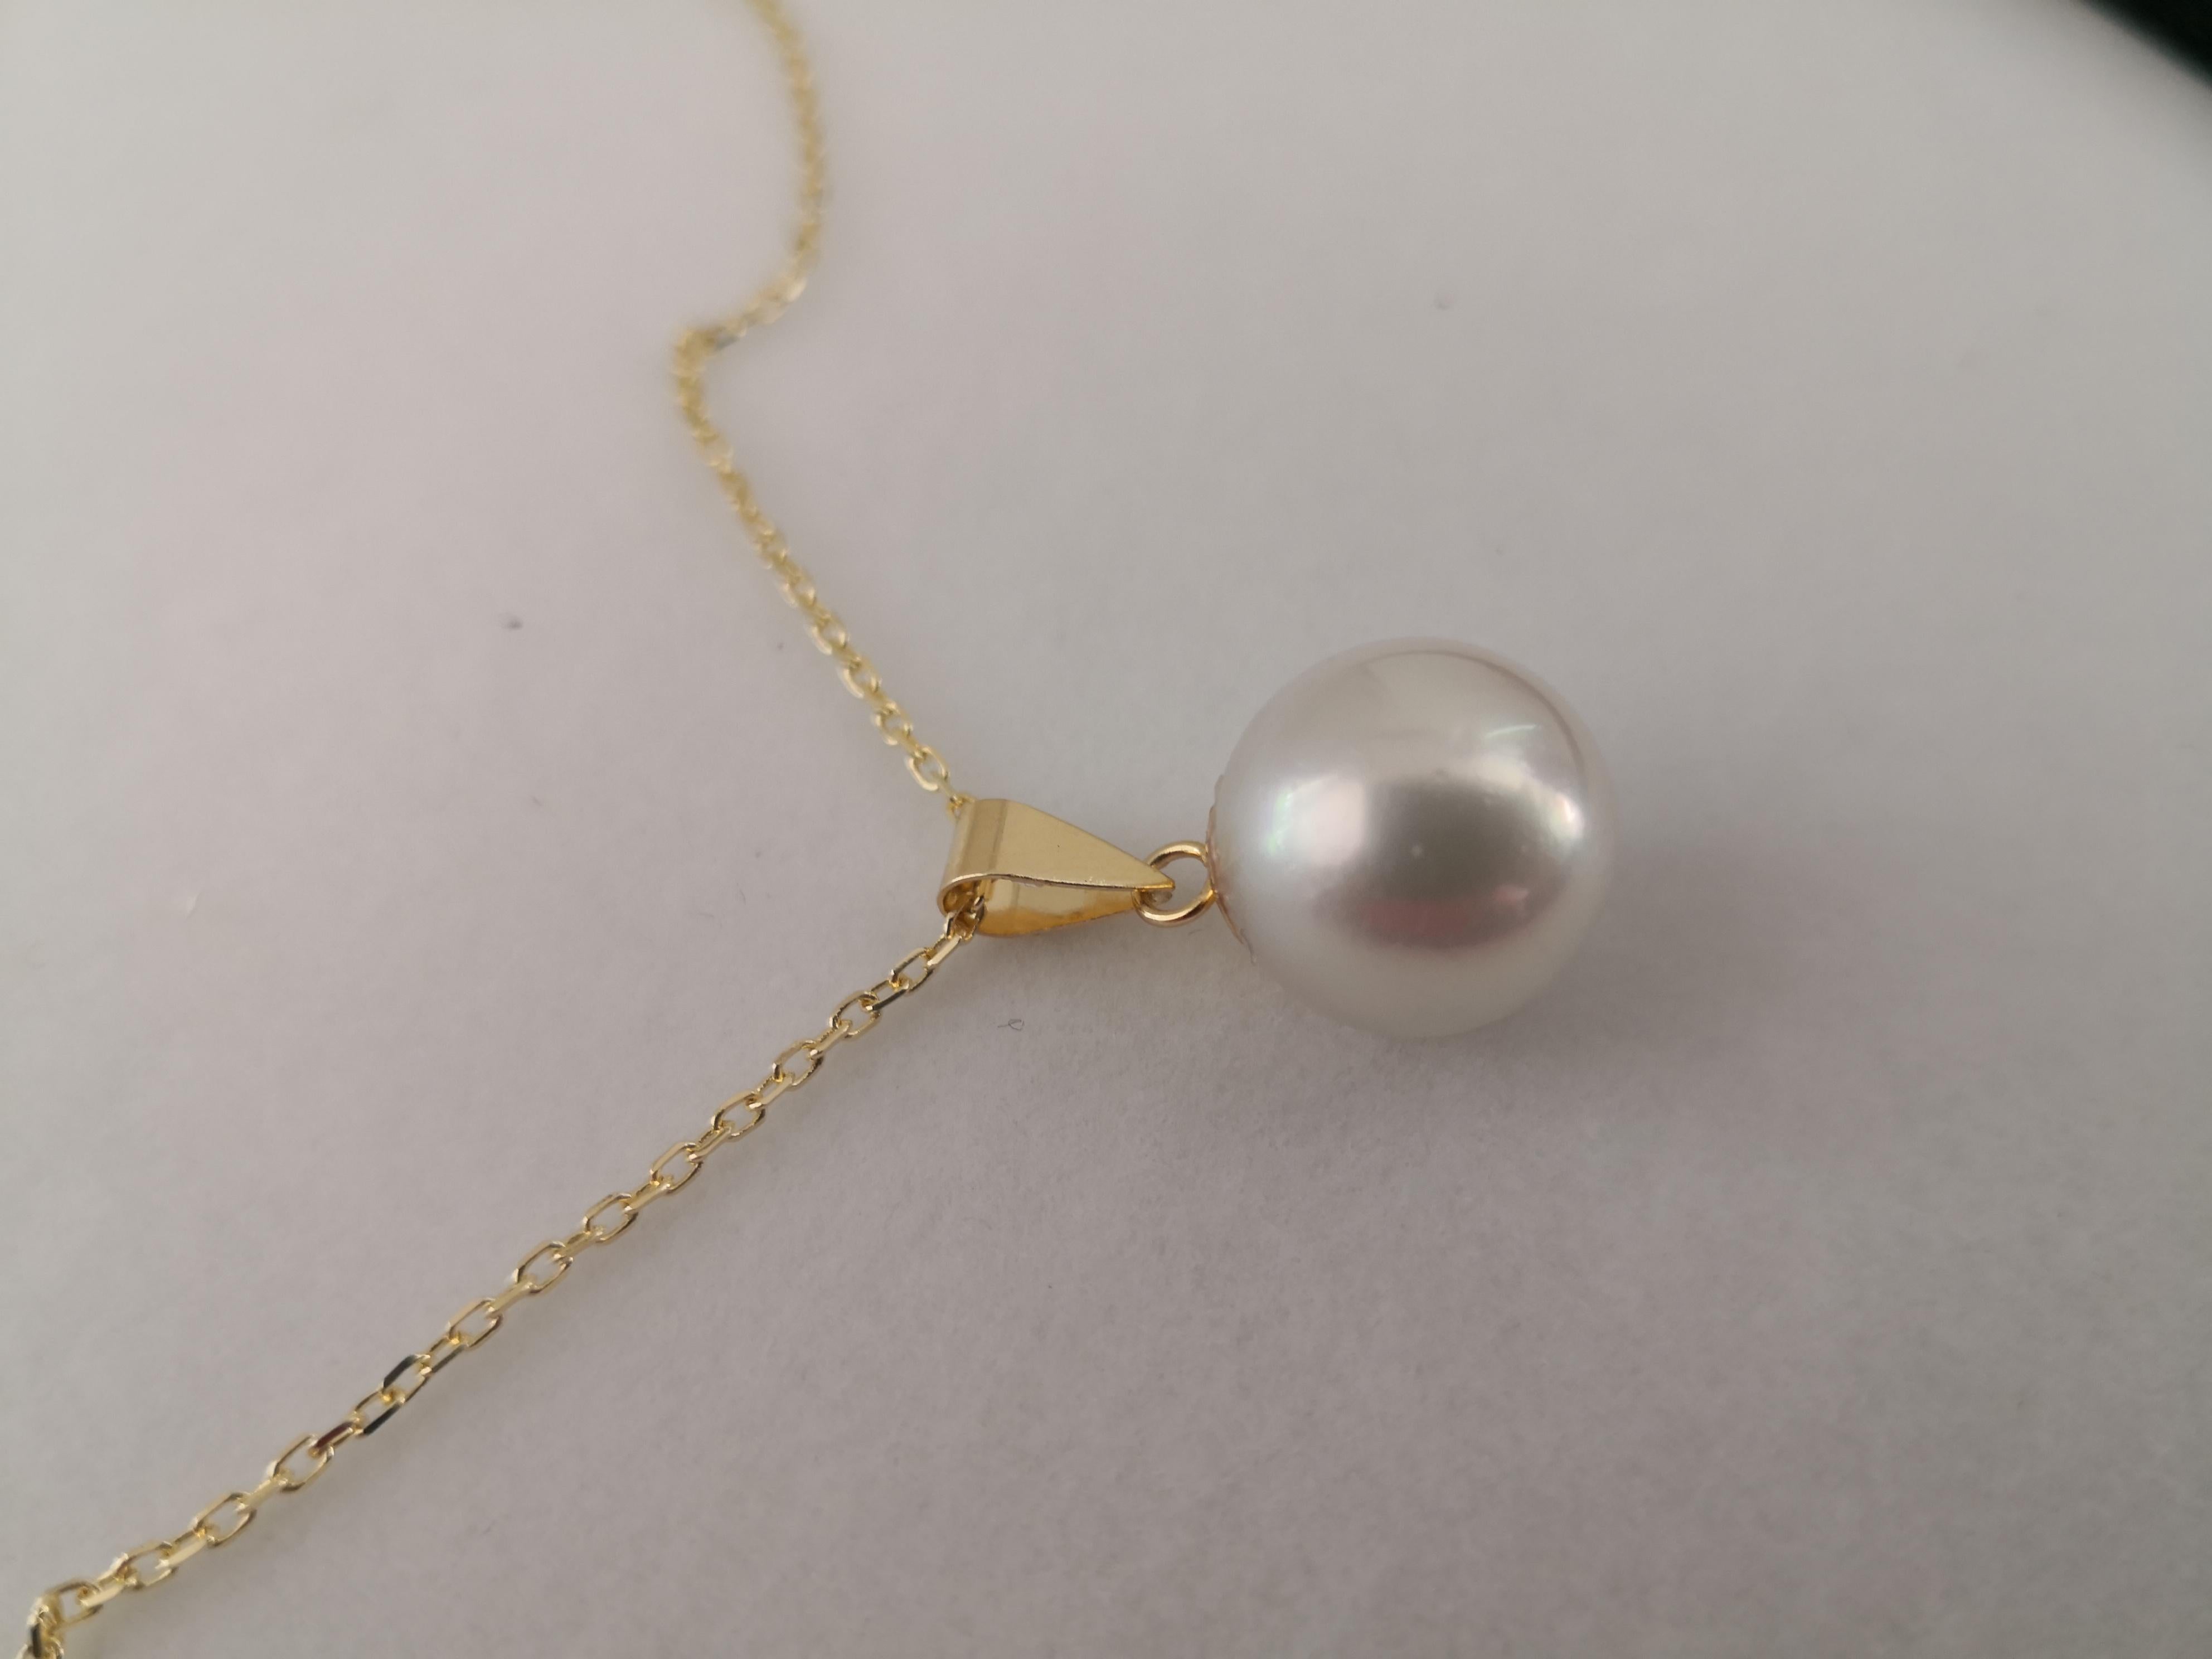 - Natural Color South Sea Pearl Pendant

- Origin: Australian ocean waters

- Produced by Pinctada Maxima Oyster

- 18 karats Yellow Gold mounting 

- 40 cm long chain manufactured in 18 karats yellow gold

- Size of Pearls 12 mm of diameter

-